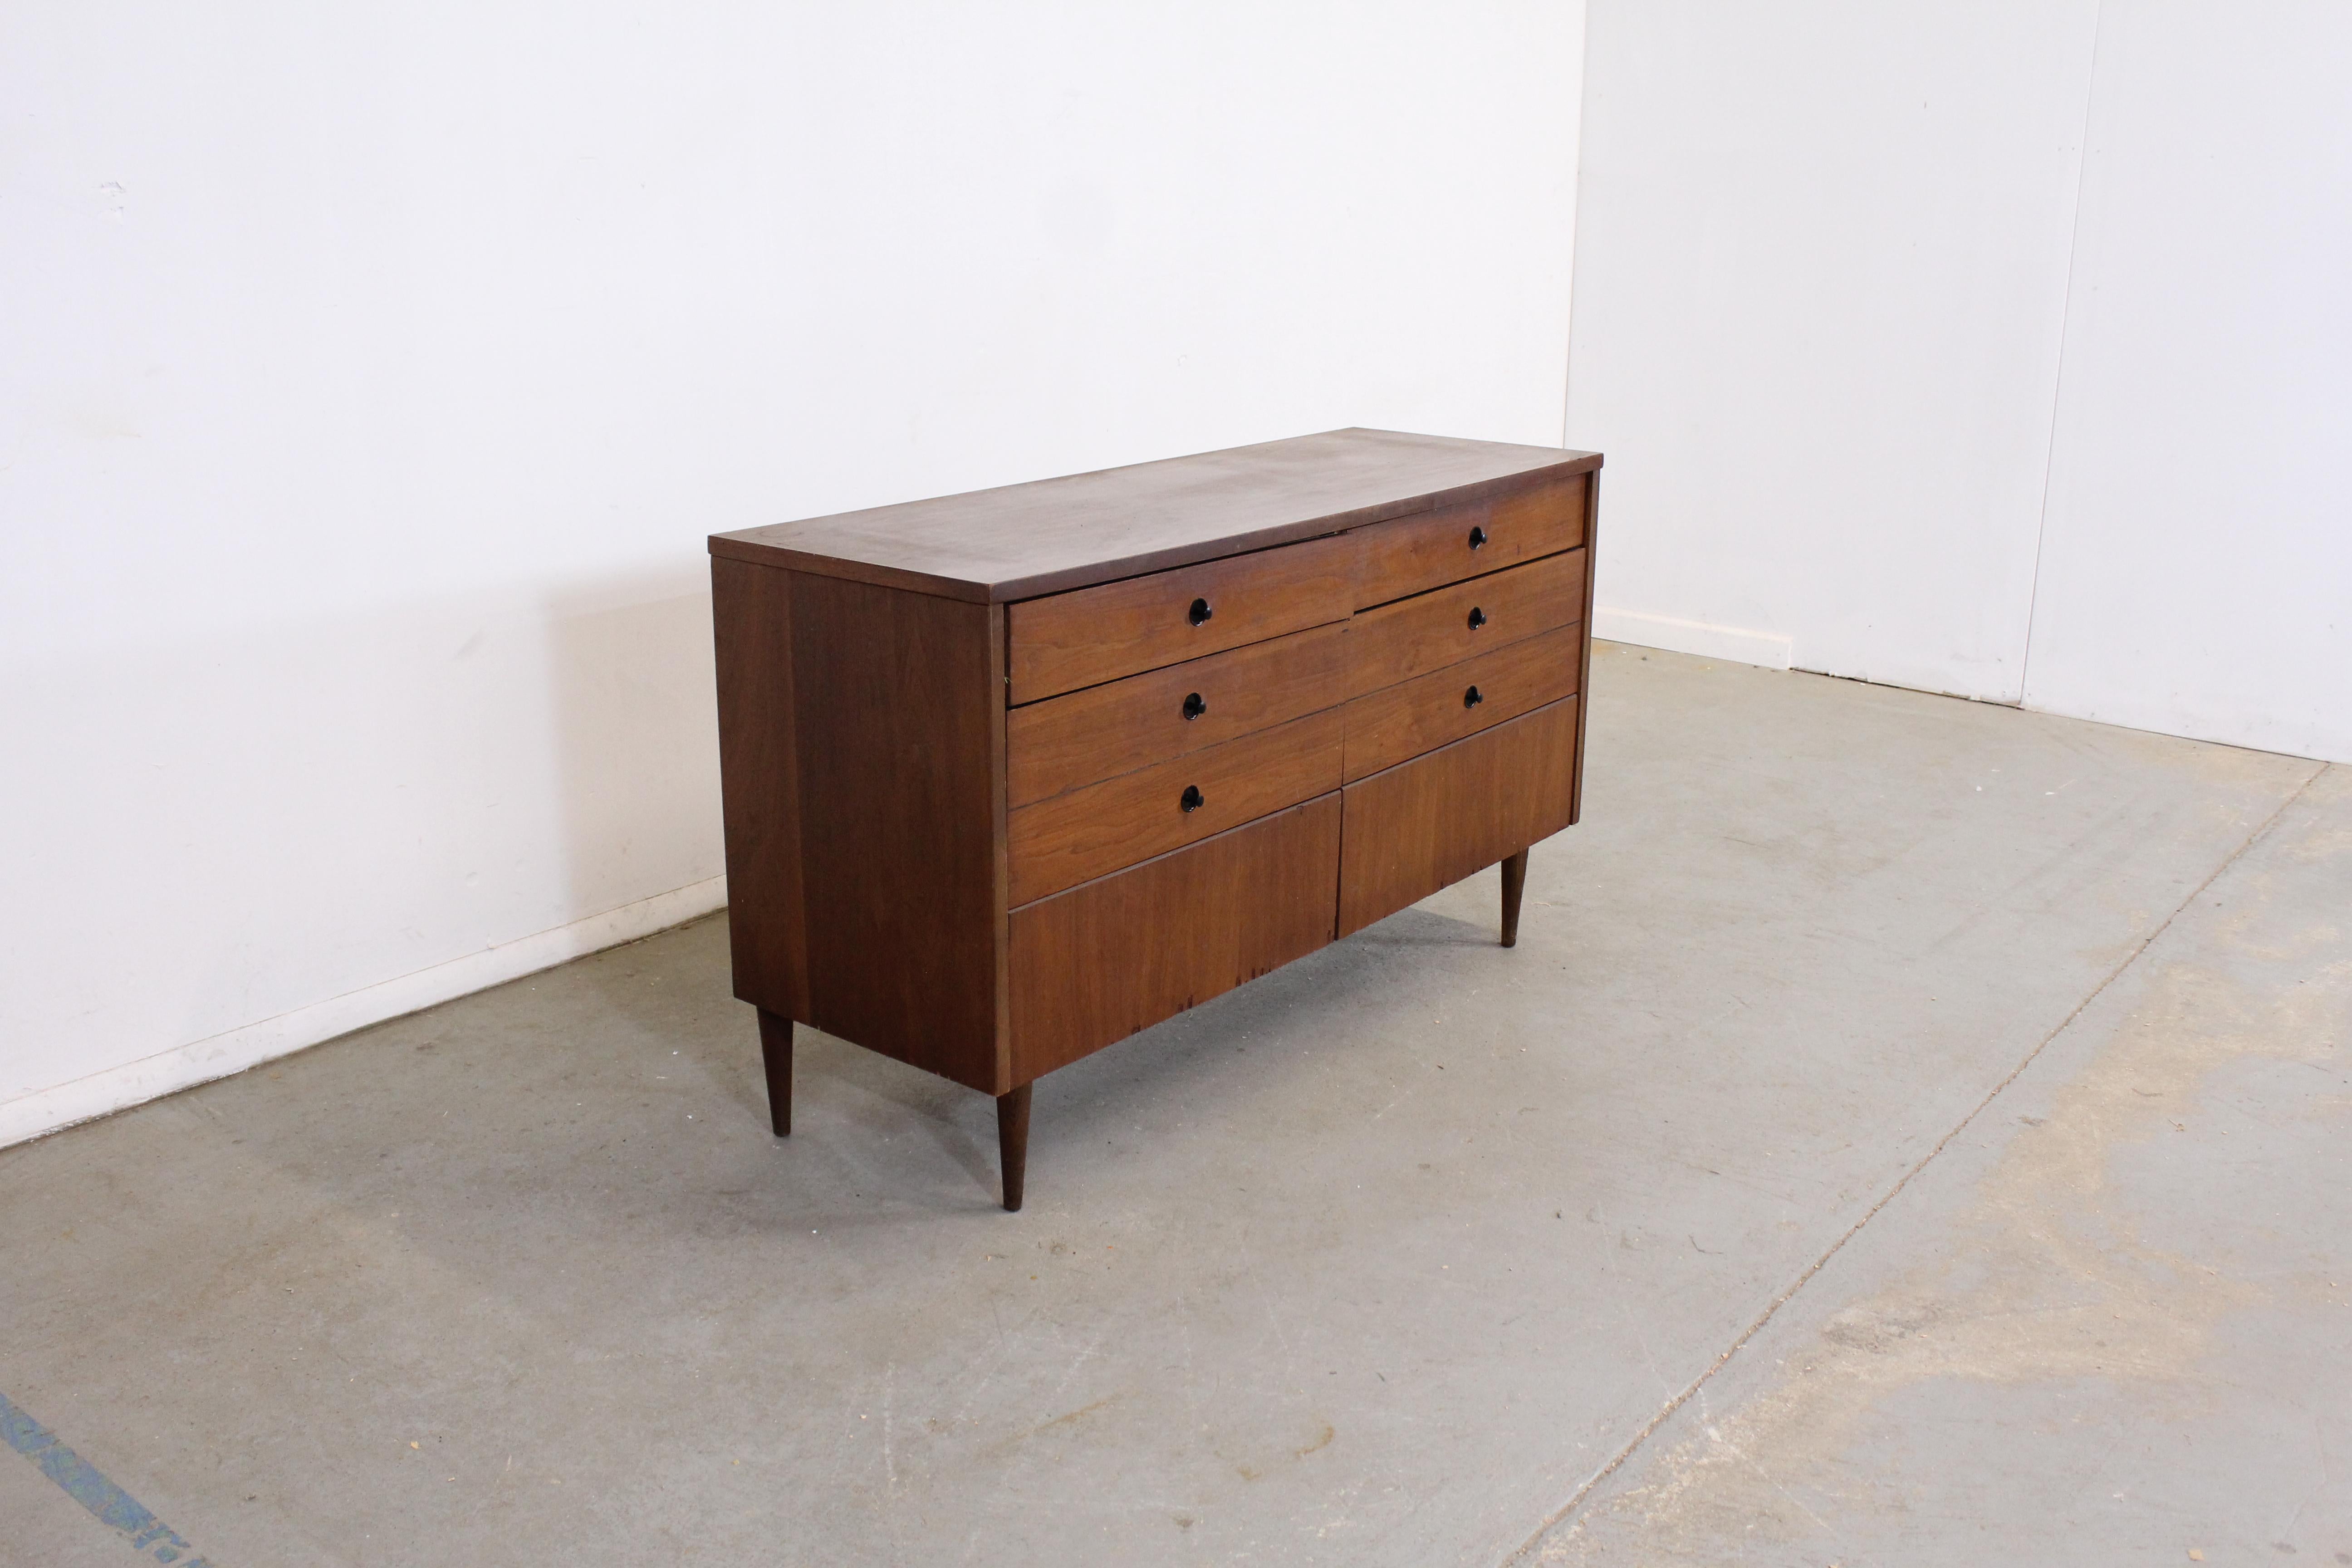 Mid-Century Modern walnut credenza on pencil legs

Offered is a vintage Mid-Century Modern credenza on pencil legs by Bassett Industries. Features a veneer top with 6 drawers with knobs. It is in overall good structural condition, has some small